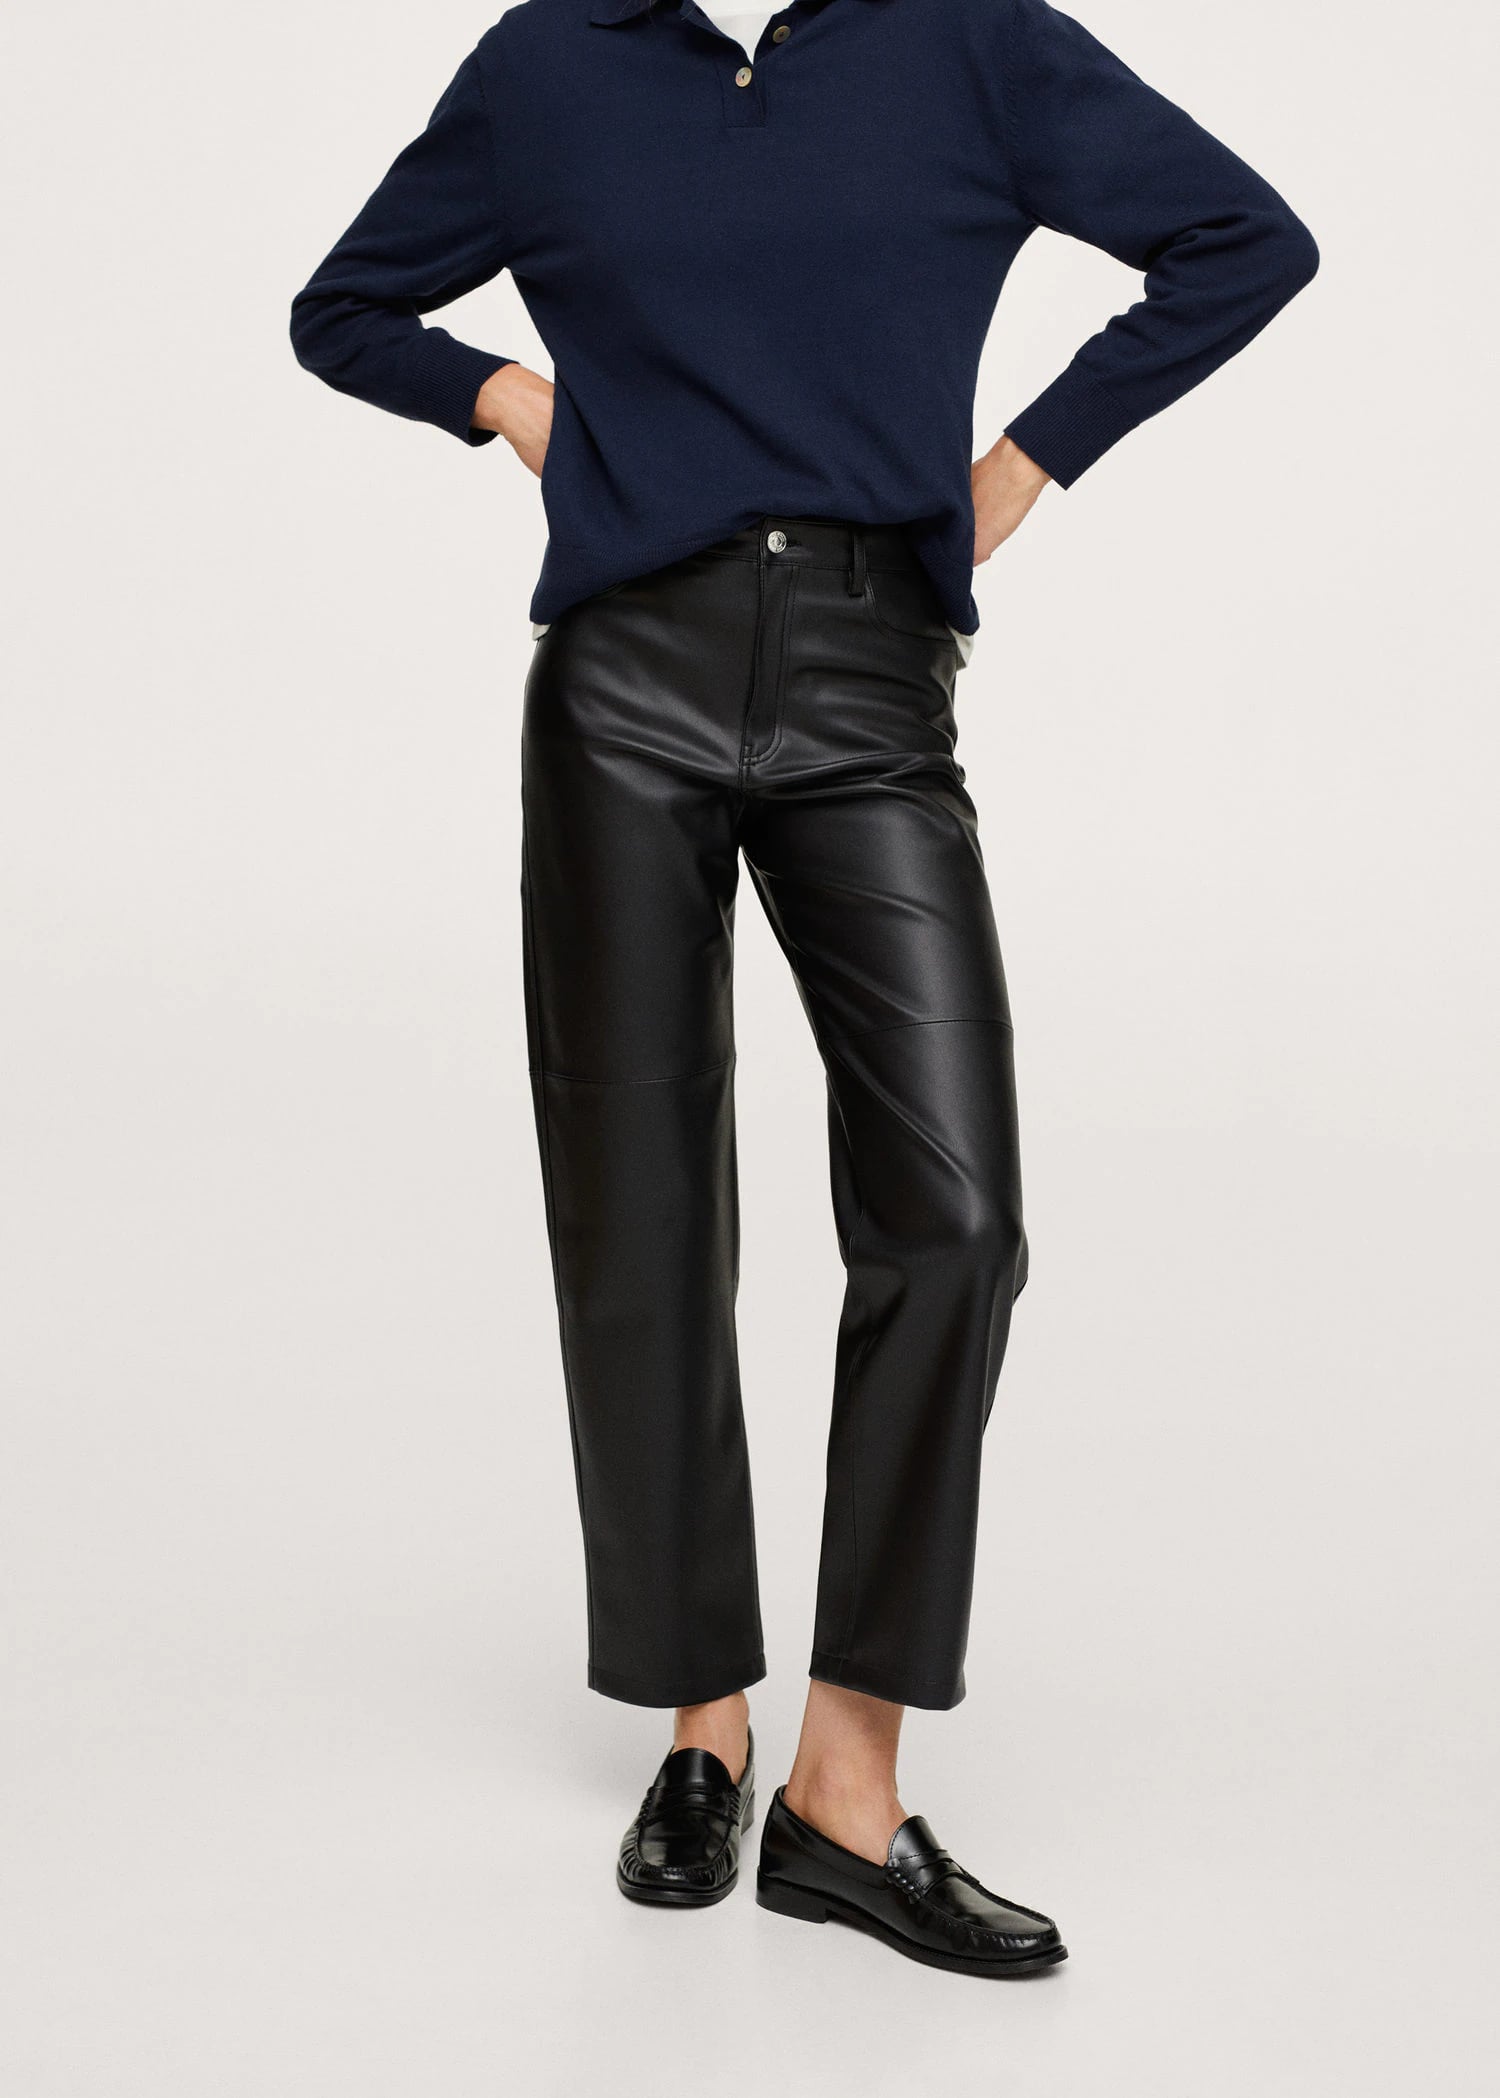 Topshop faux leather straight leg pants in black - ShopStyle